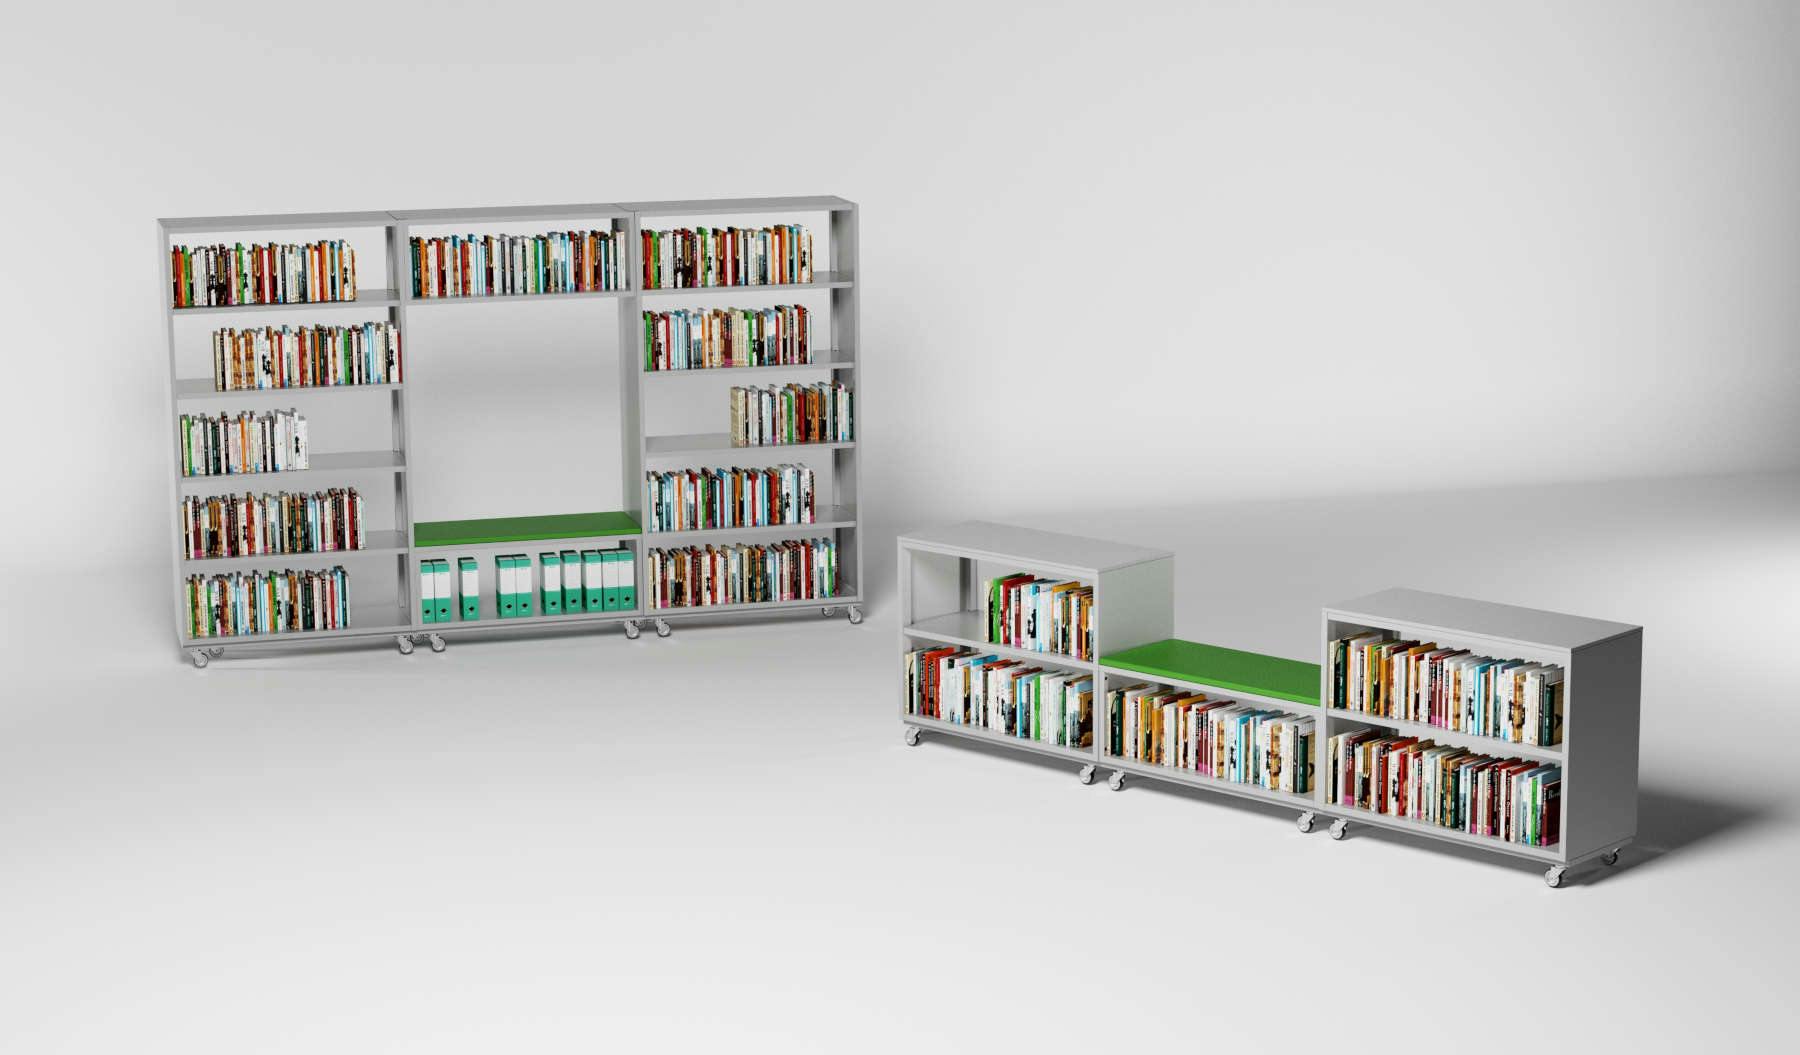 Library shelving system